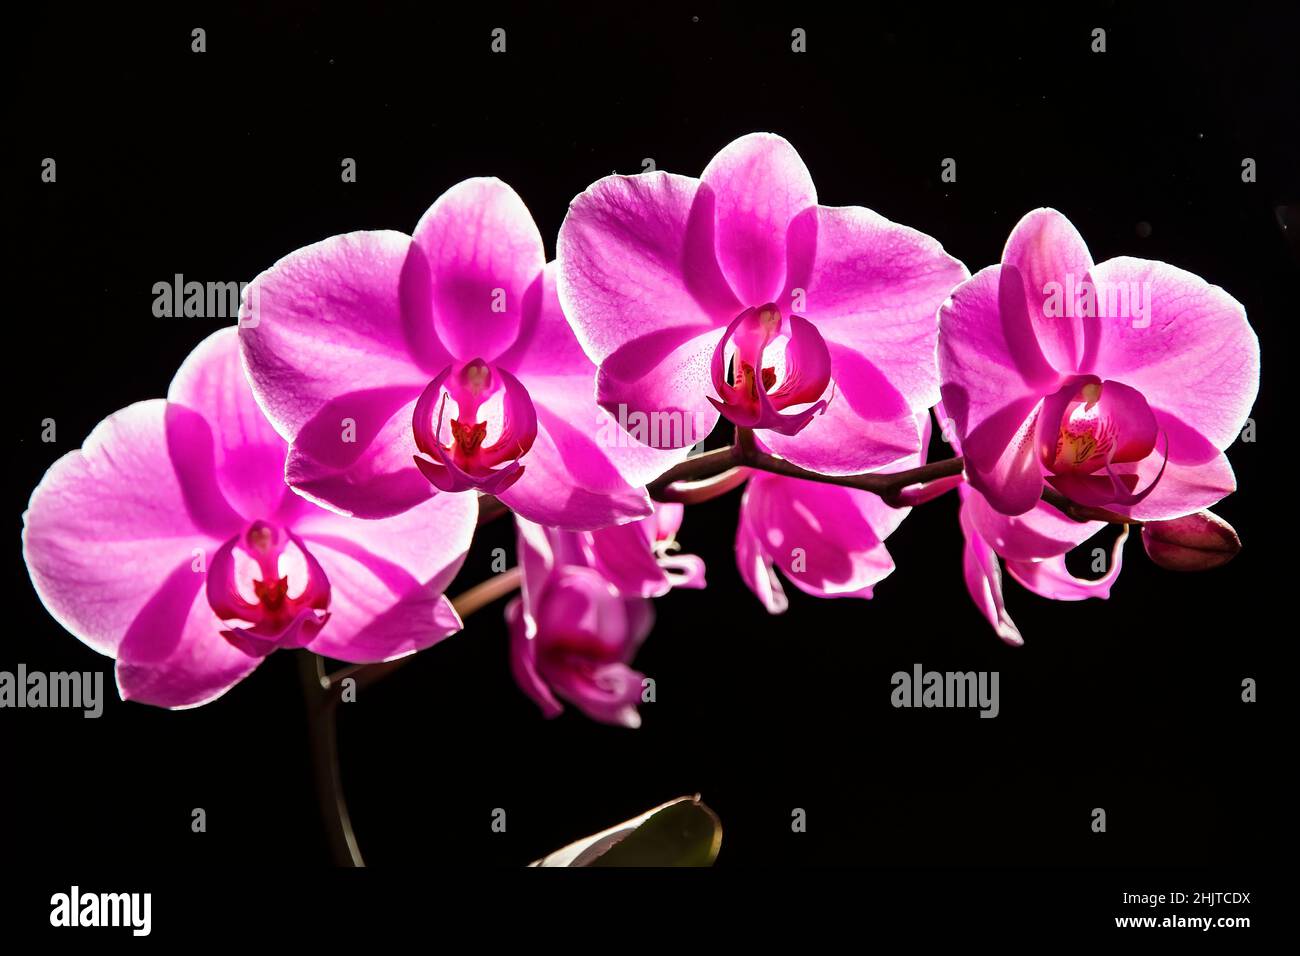 Soft focus. Phalaenopsis orchid branch with many pink butterfly flowers on a dark background. Lovely orchid flowers on a dark background for a calenda Stock Photo